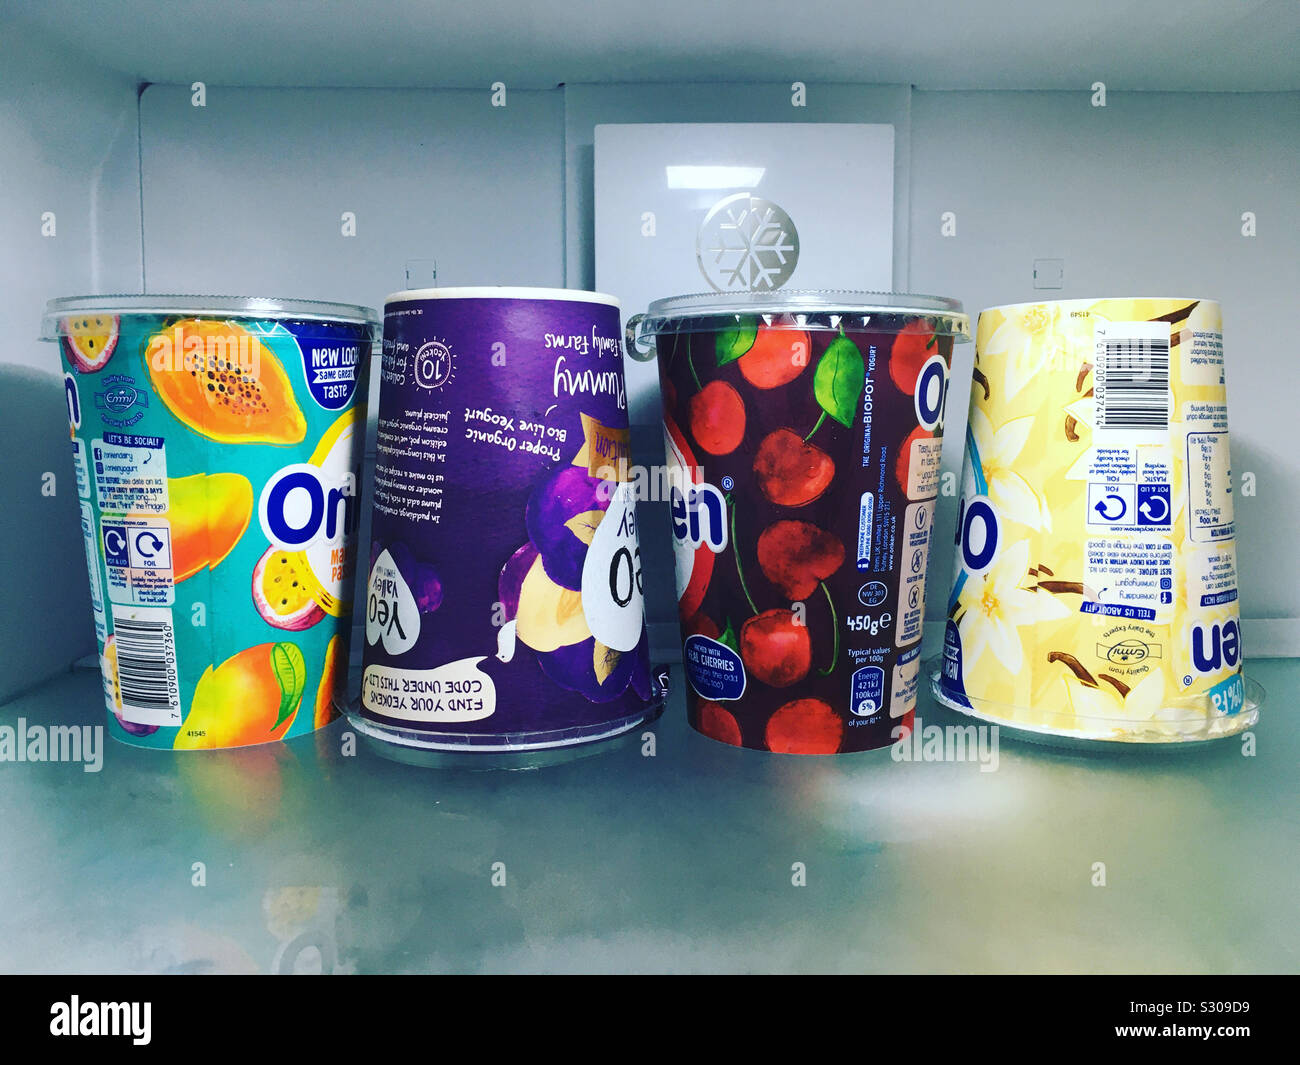 Packing the fridge efficiently so that cartons tessellate together. Some yoghurt pots are upside down so that all can be stored close together saving space and maximising capacity. Uk Stock Photo